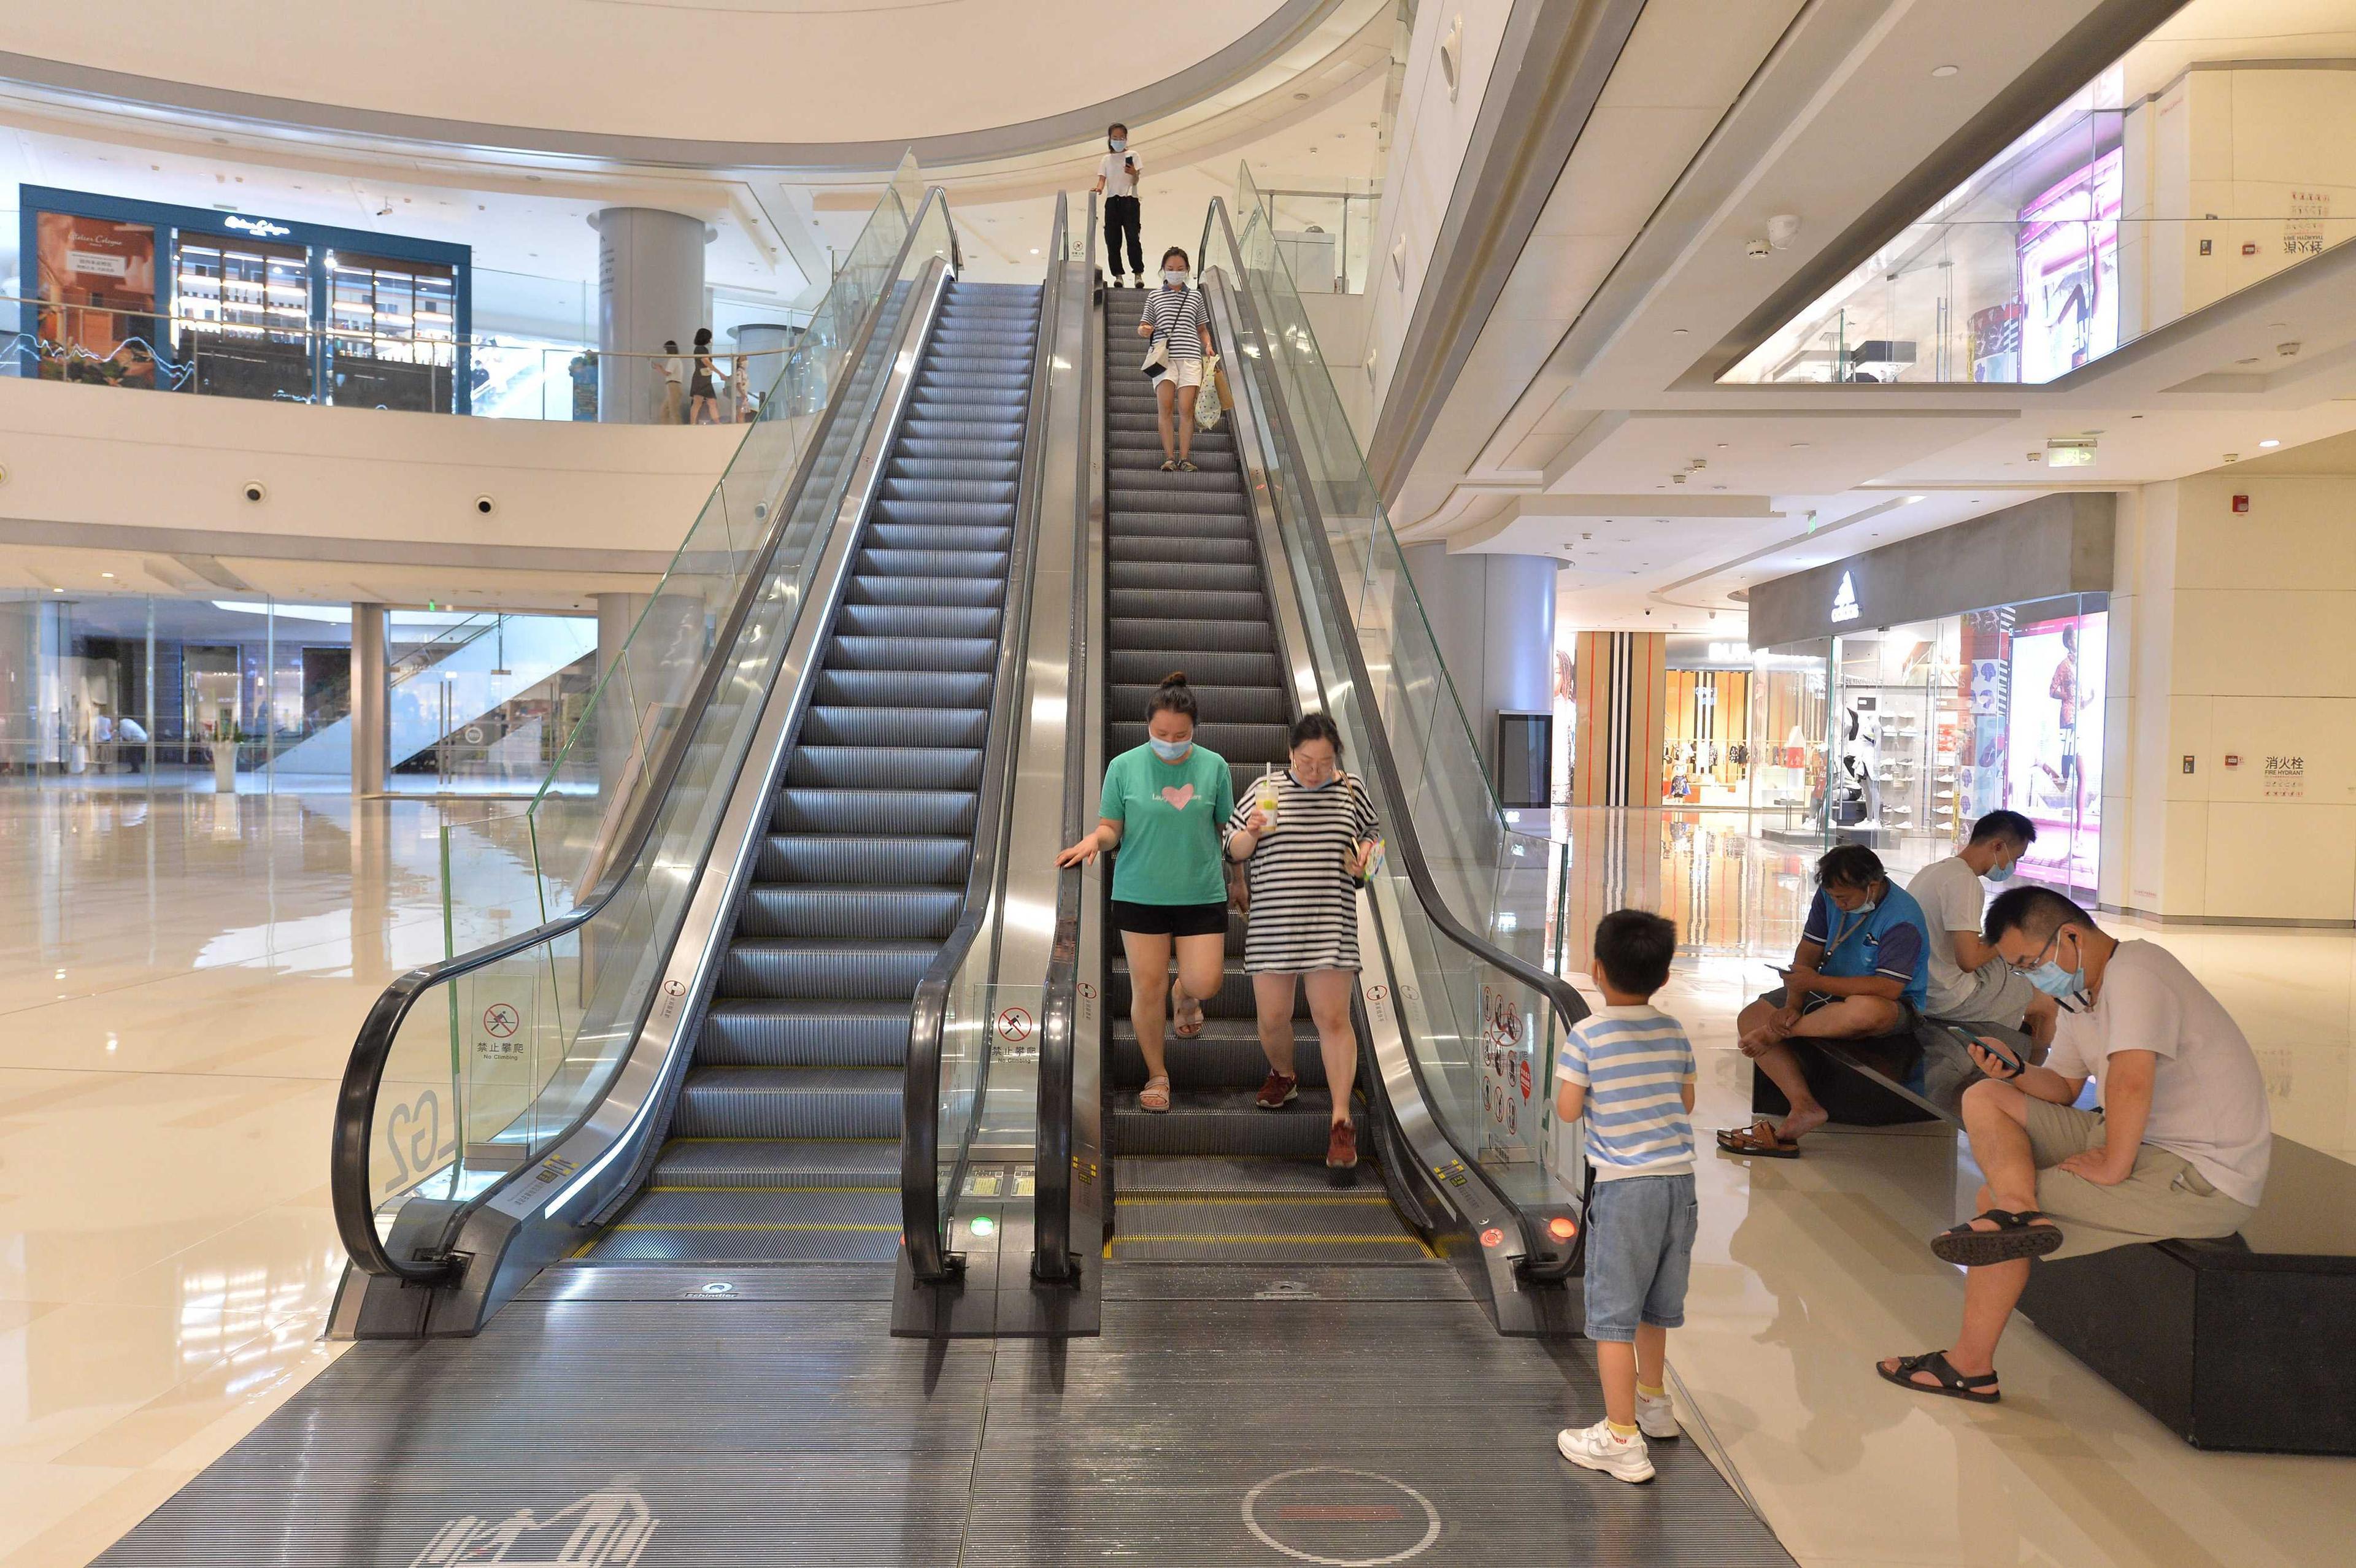 This photo taken on Aug 17, shows people walking down from an escalator at a shopping mall in Chengdu, in China's southwestern Sichuan province. Photo: AFP 